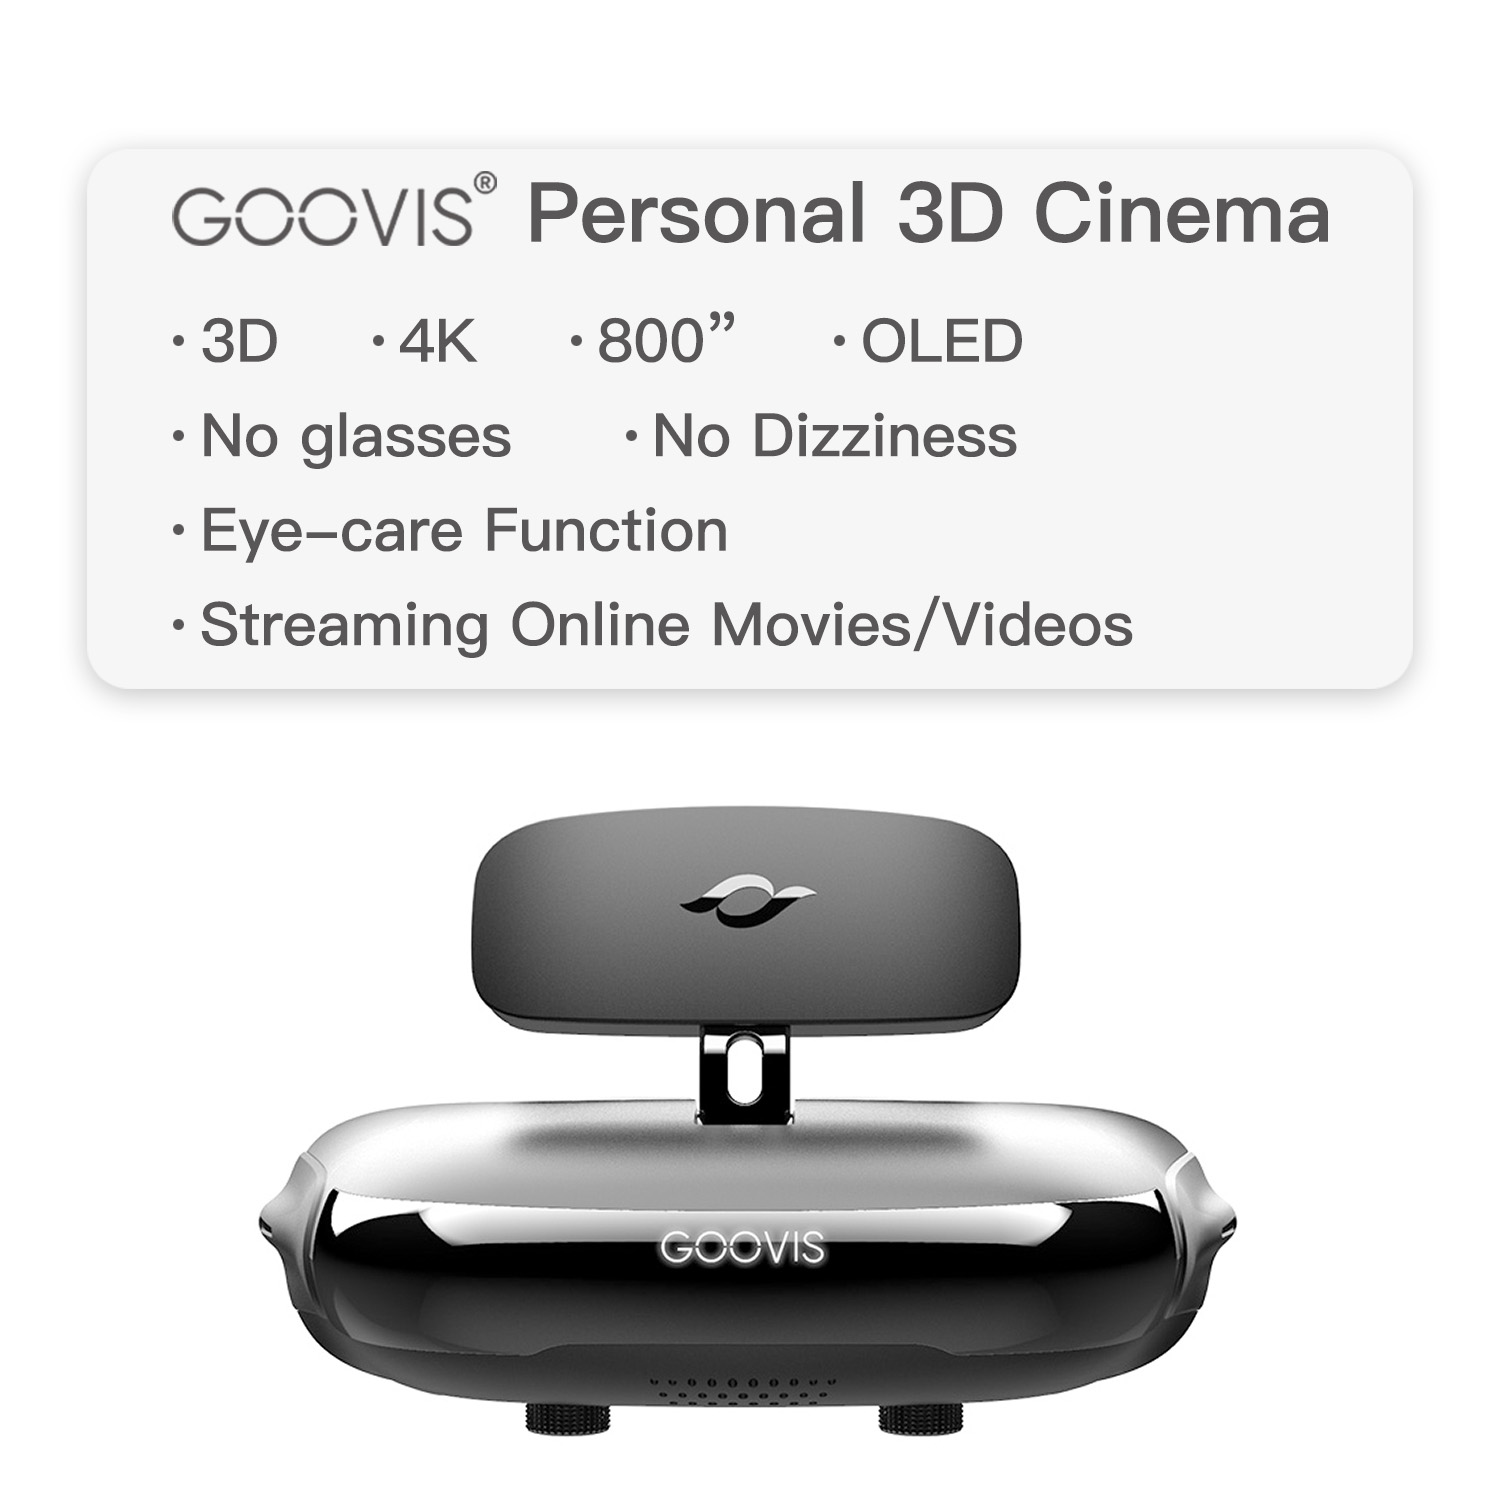 GOOVIS Cinego G2 Cinema VR Headset 3D Theater Goggles,with Sony OLED 1